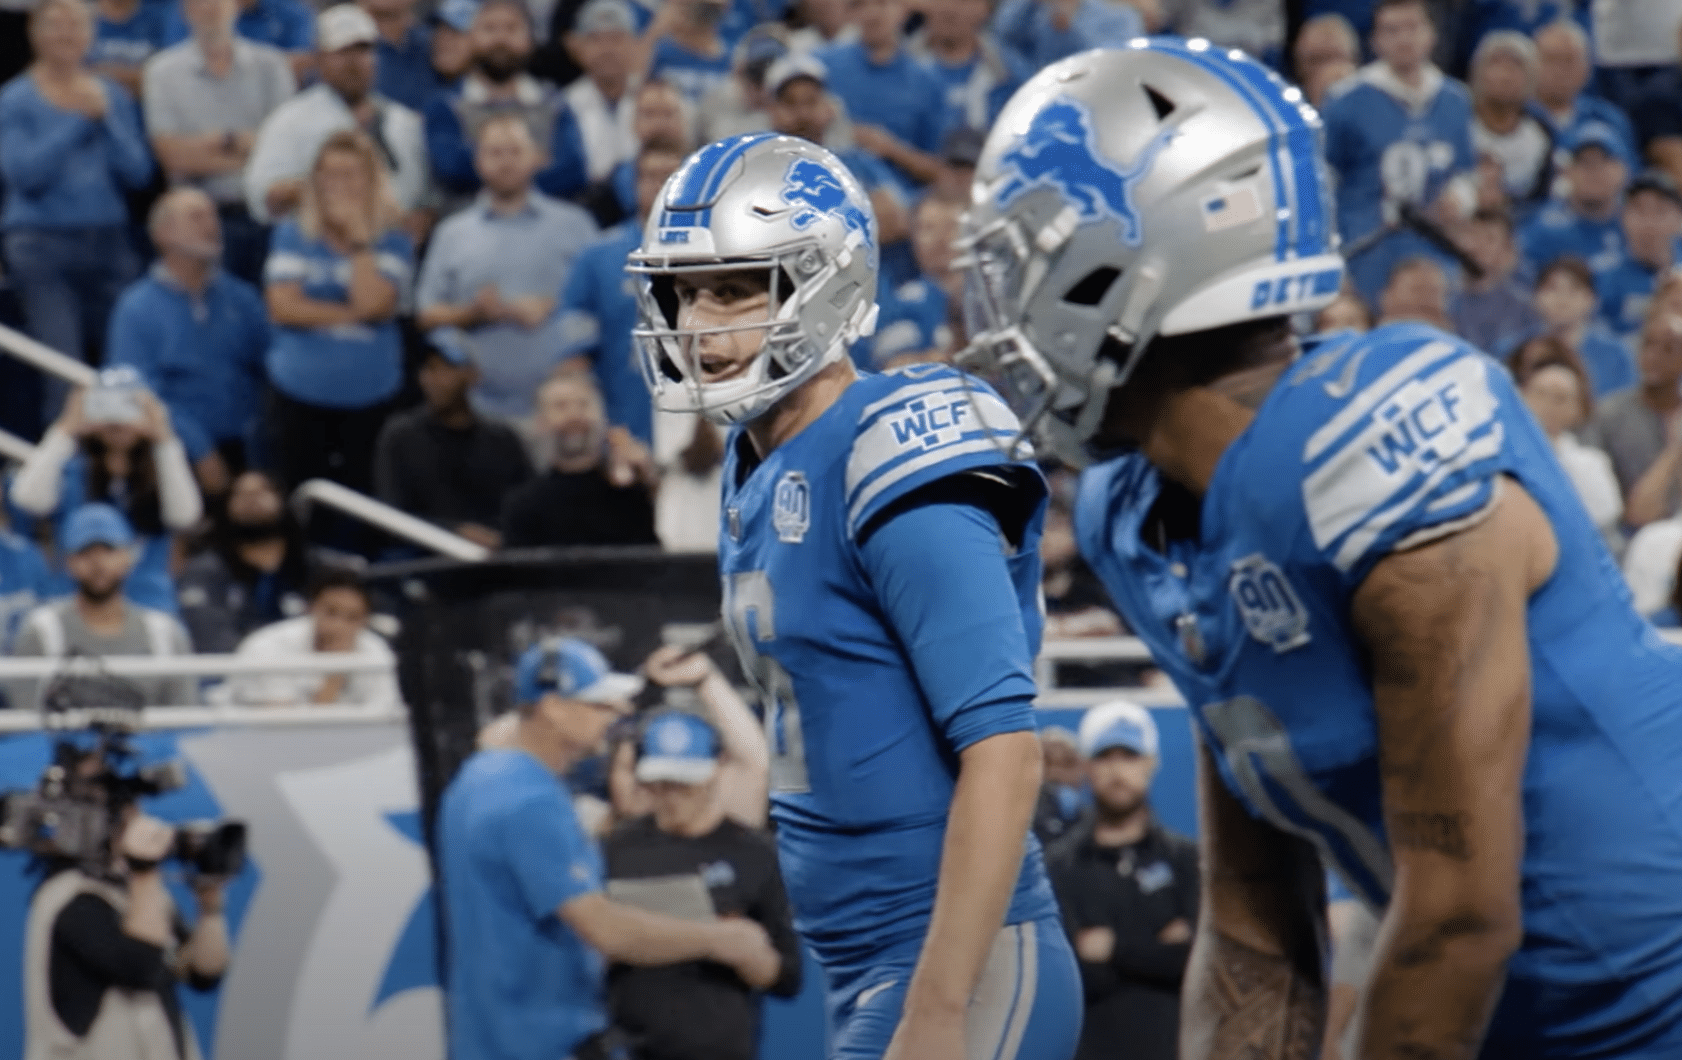 Detroit Lions starting offense Is Jared Goff An MVP Candidate Detroit Lions PFF Grades vs. Raiders Jared Goff may have to wait Update: Jared Goff Contract Extension Talks With Detroit Lions Should the Detroit Lions Rest Their Starters Agent of Jared Goff